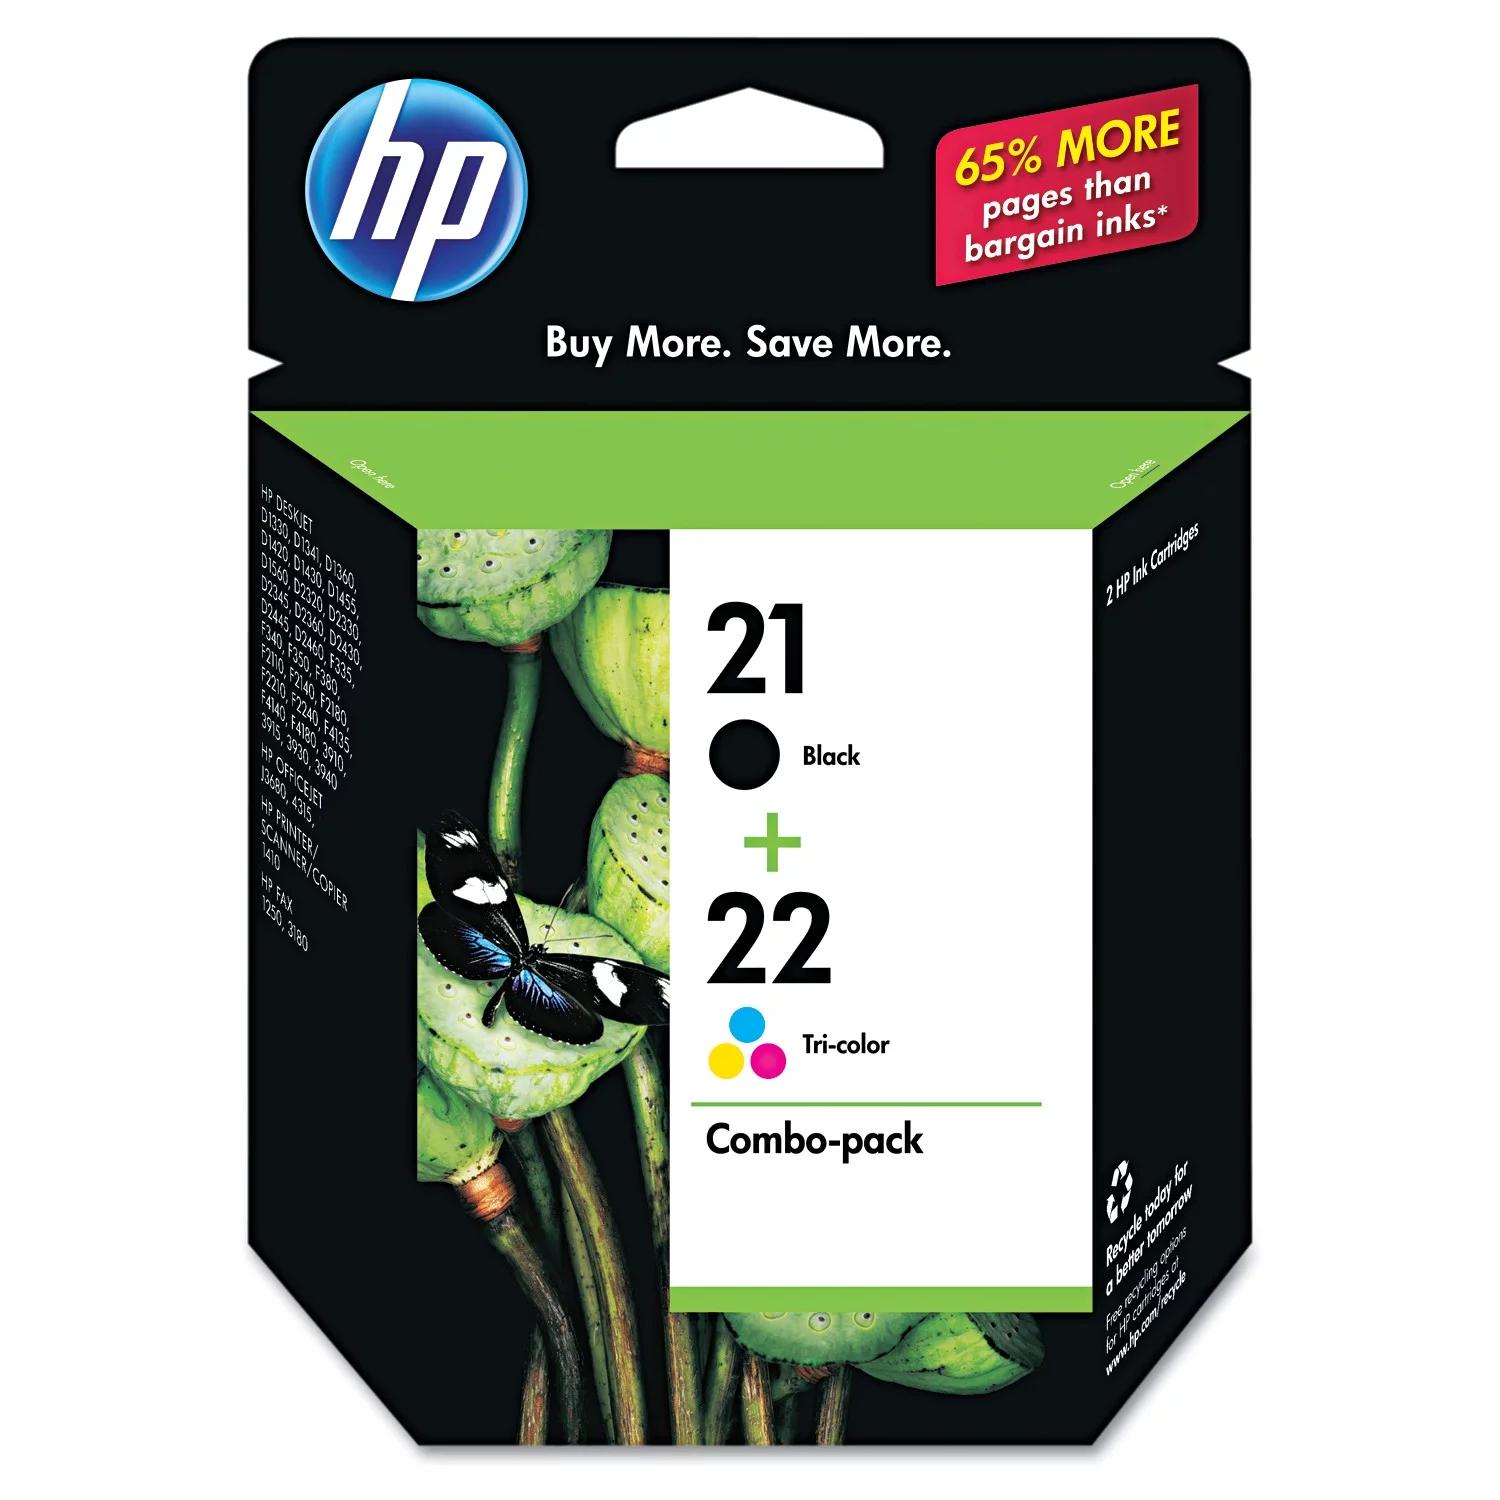 Hp ink cartridges 21 22: compatibility, expiry dates & replacement